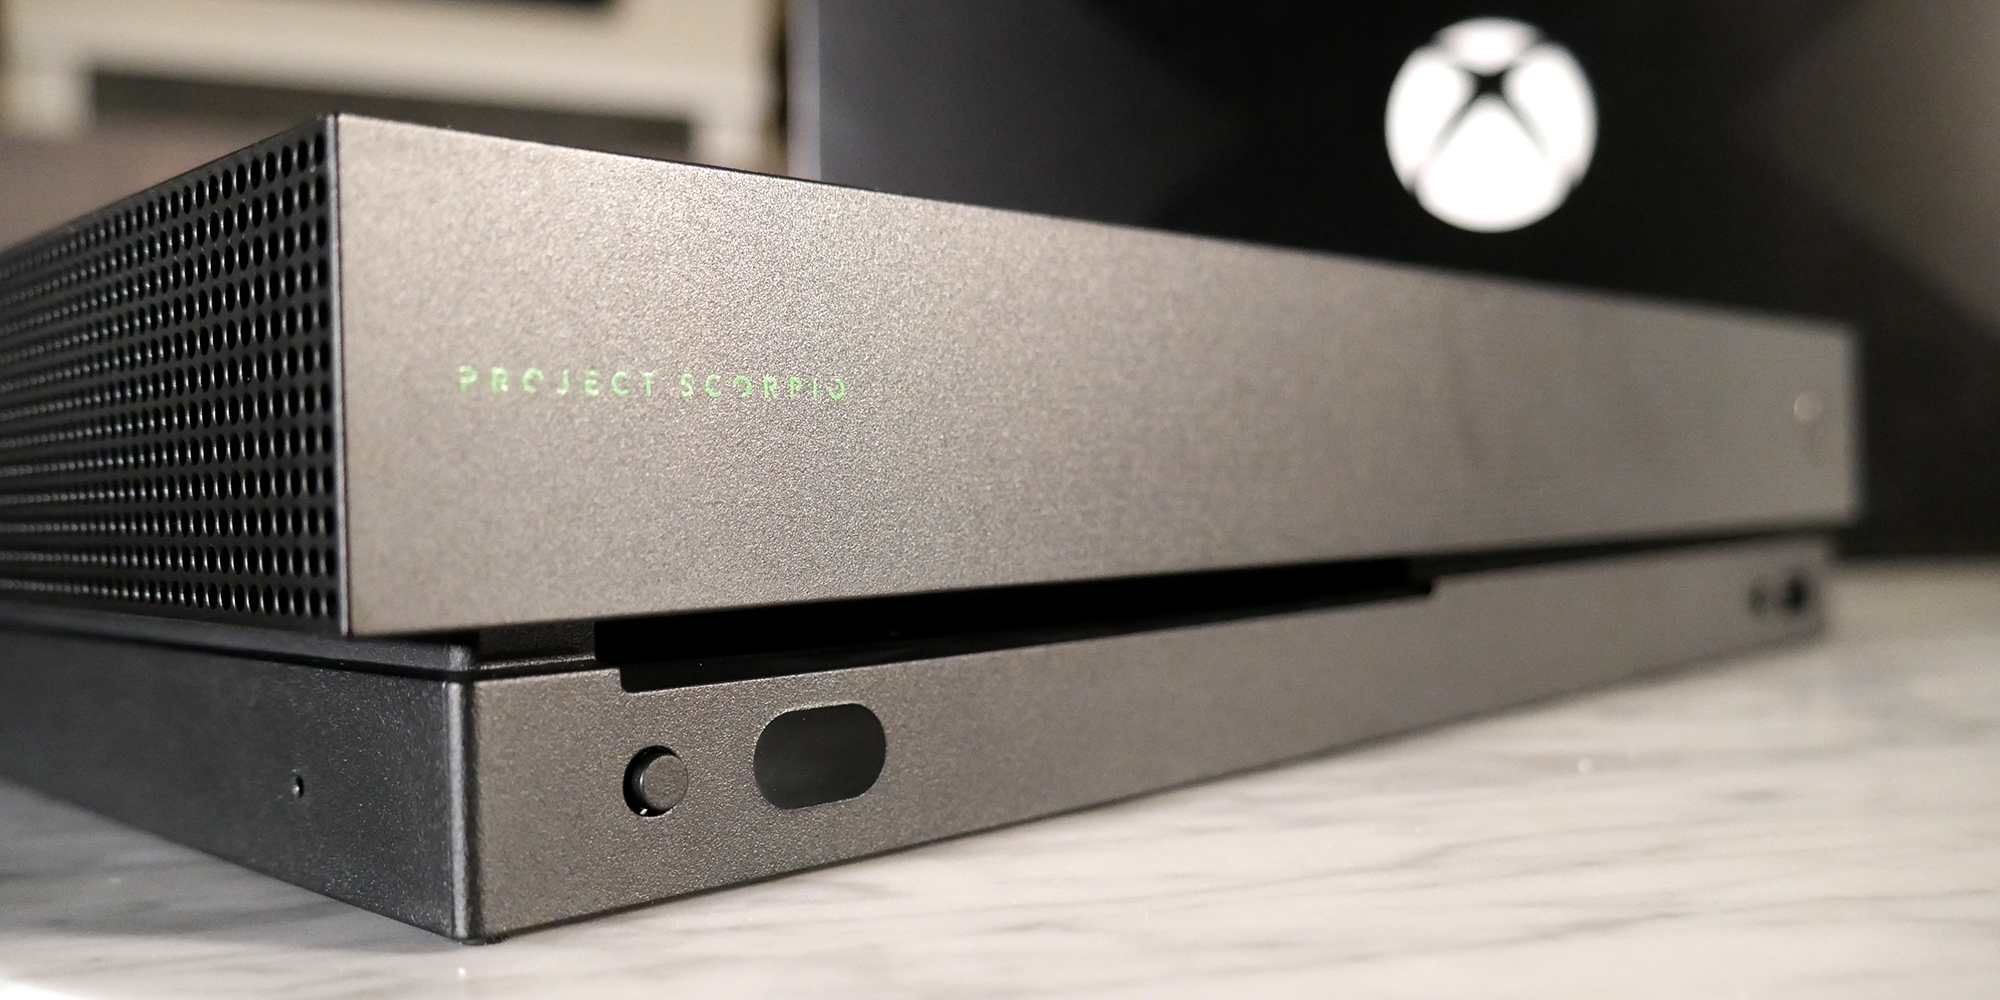 Kardinaal beet Arena Xbox One X Project Scorpio Unboxing: First impressions w/ Microsoft's new  4K console [Video]